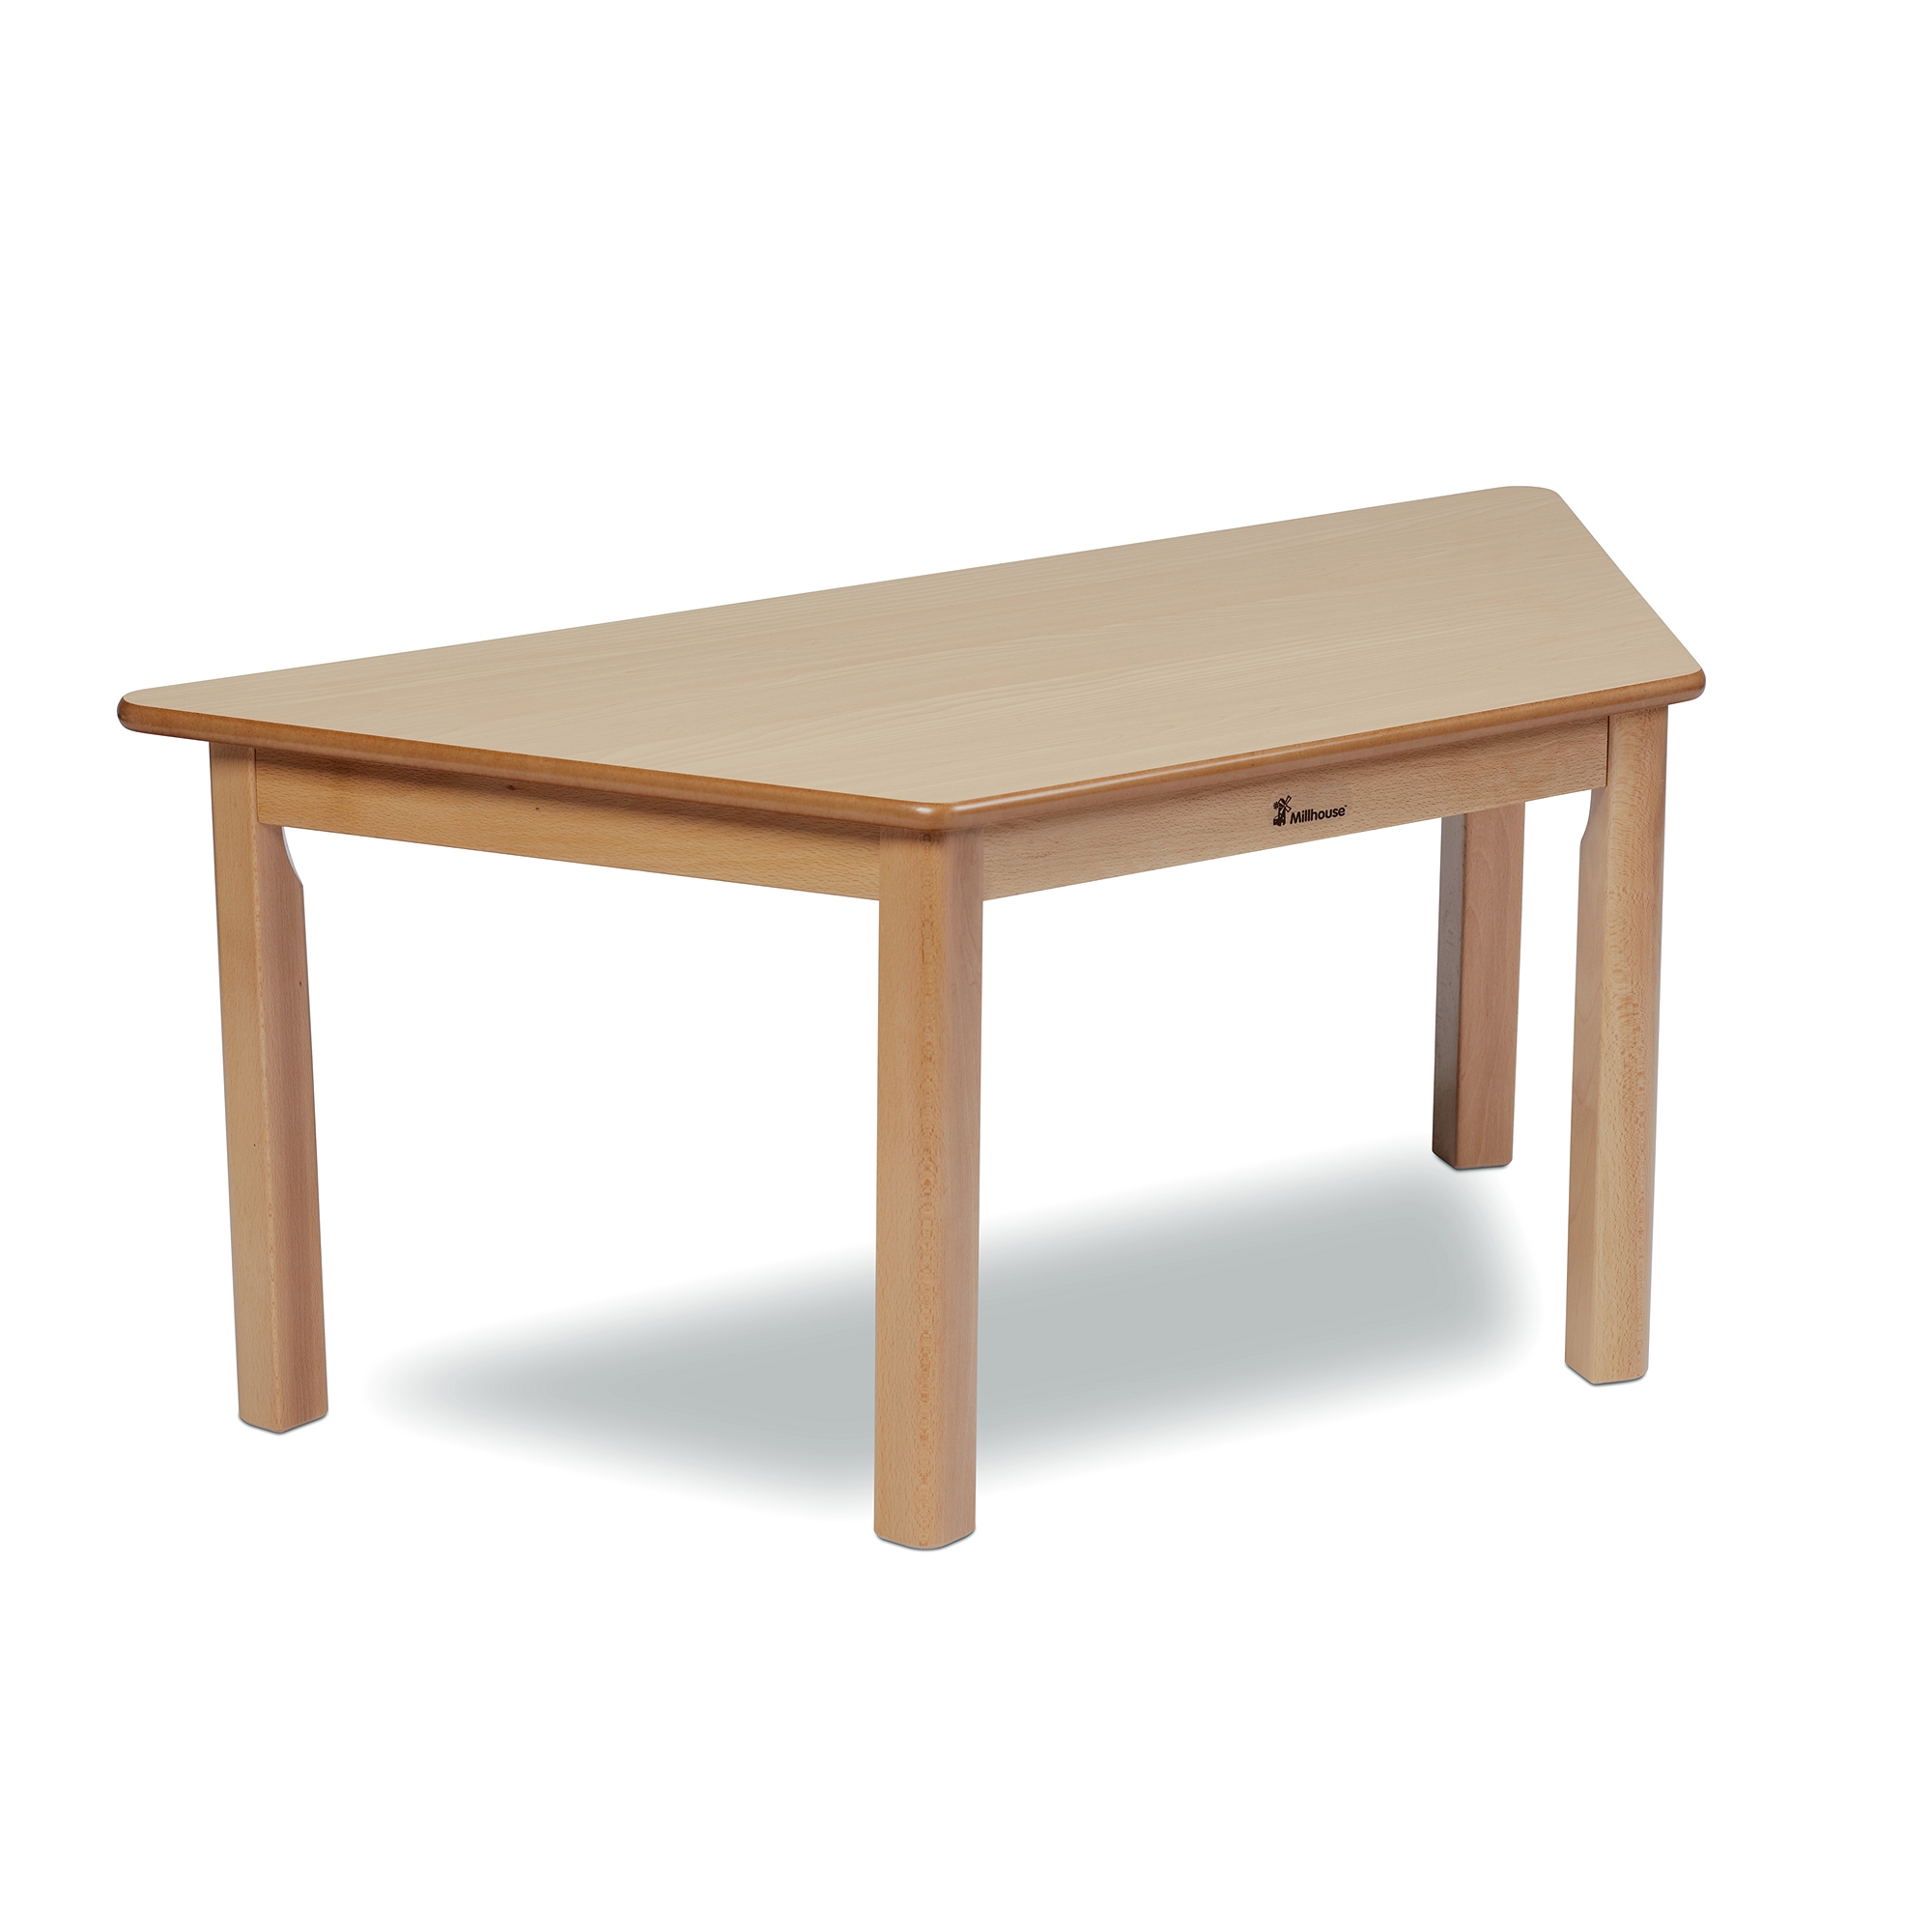 Playscapes Trapezoid Table - 530mm Height